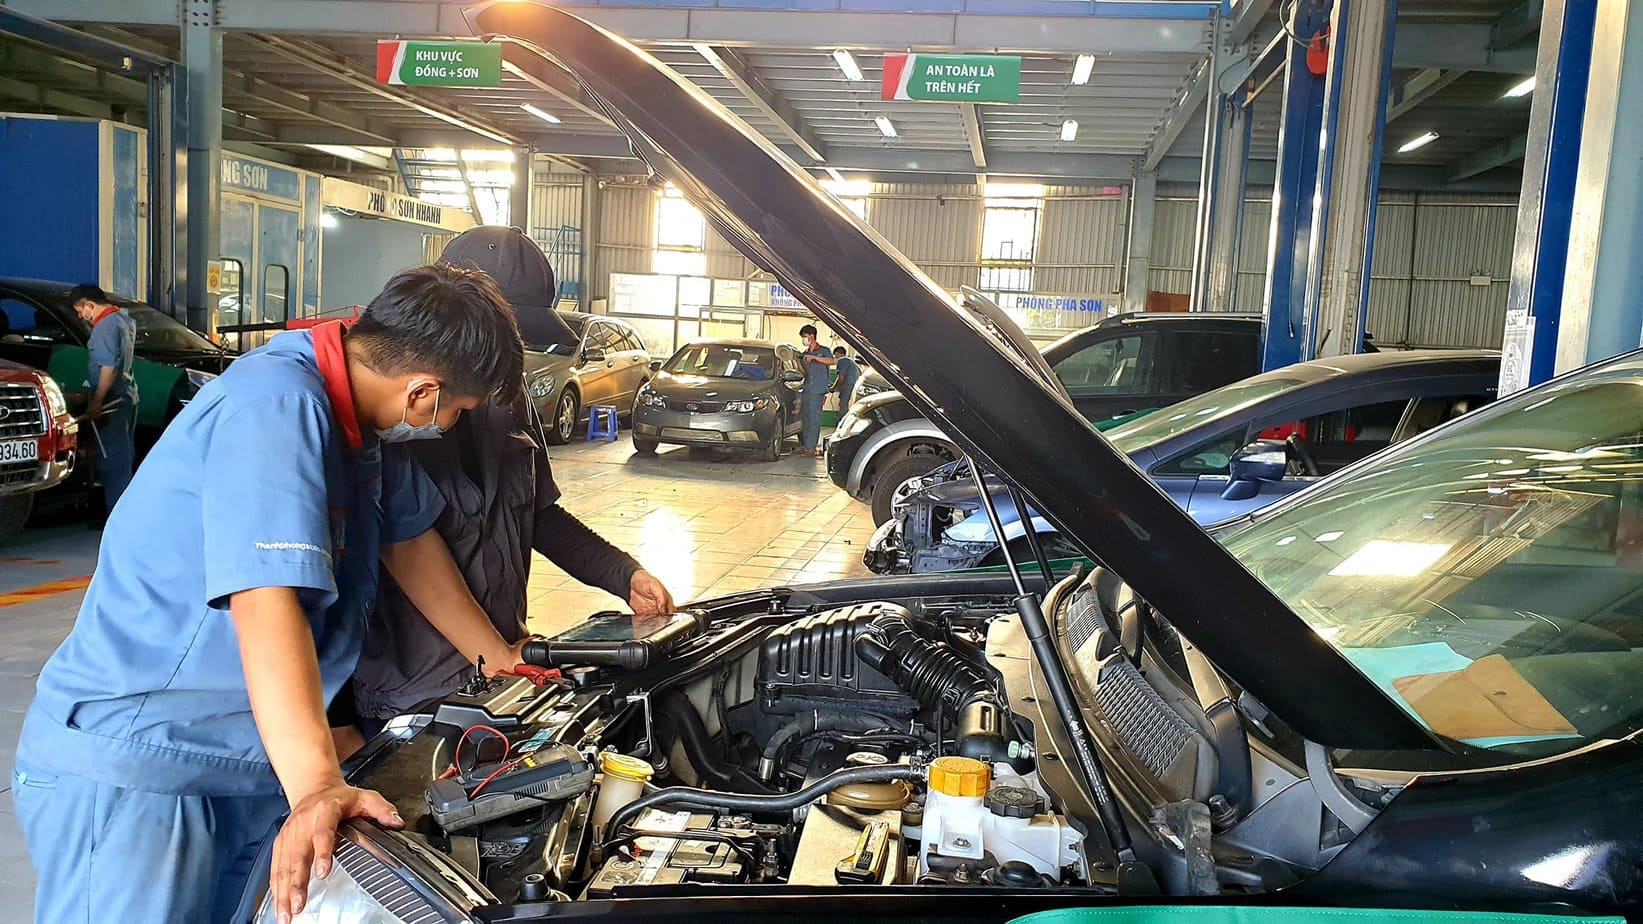 Learn and practice directly at the Garage in contact with the latest models of cars